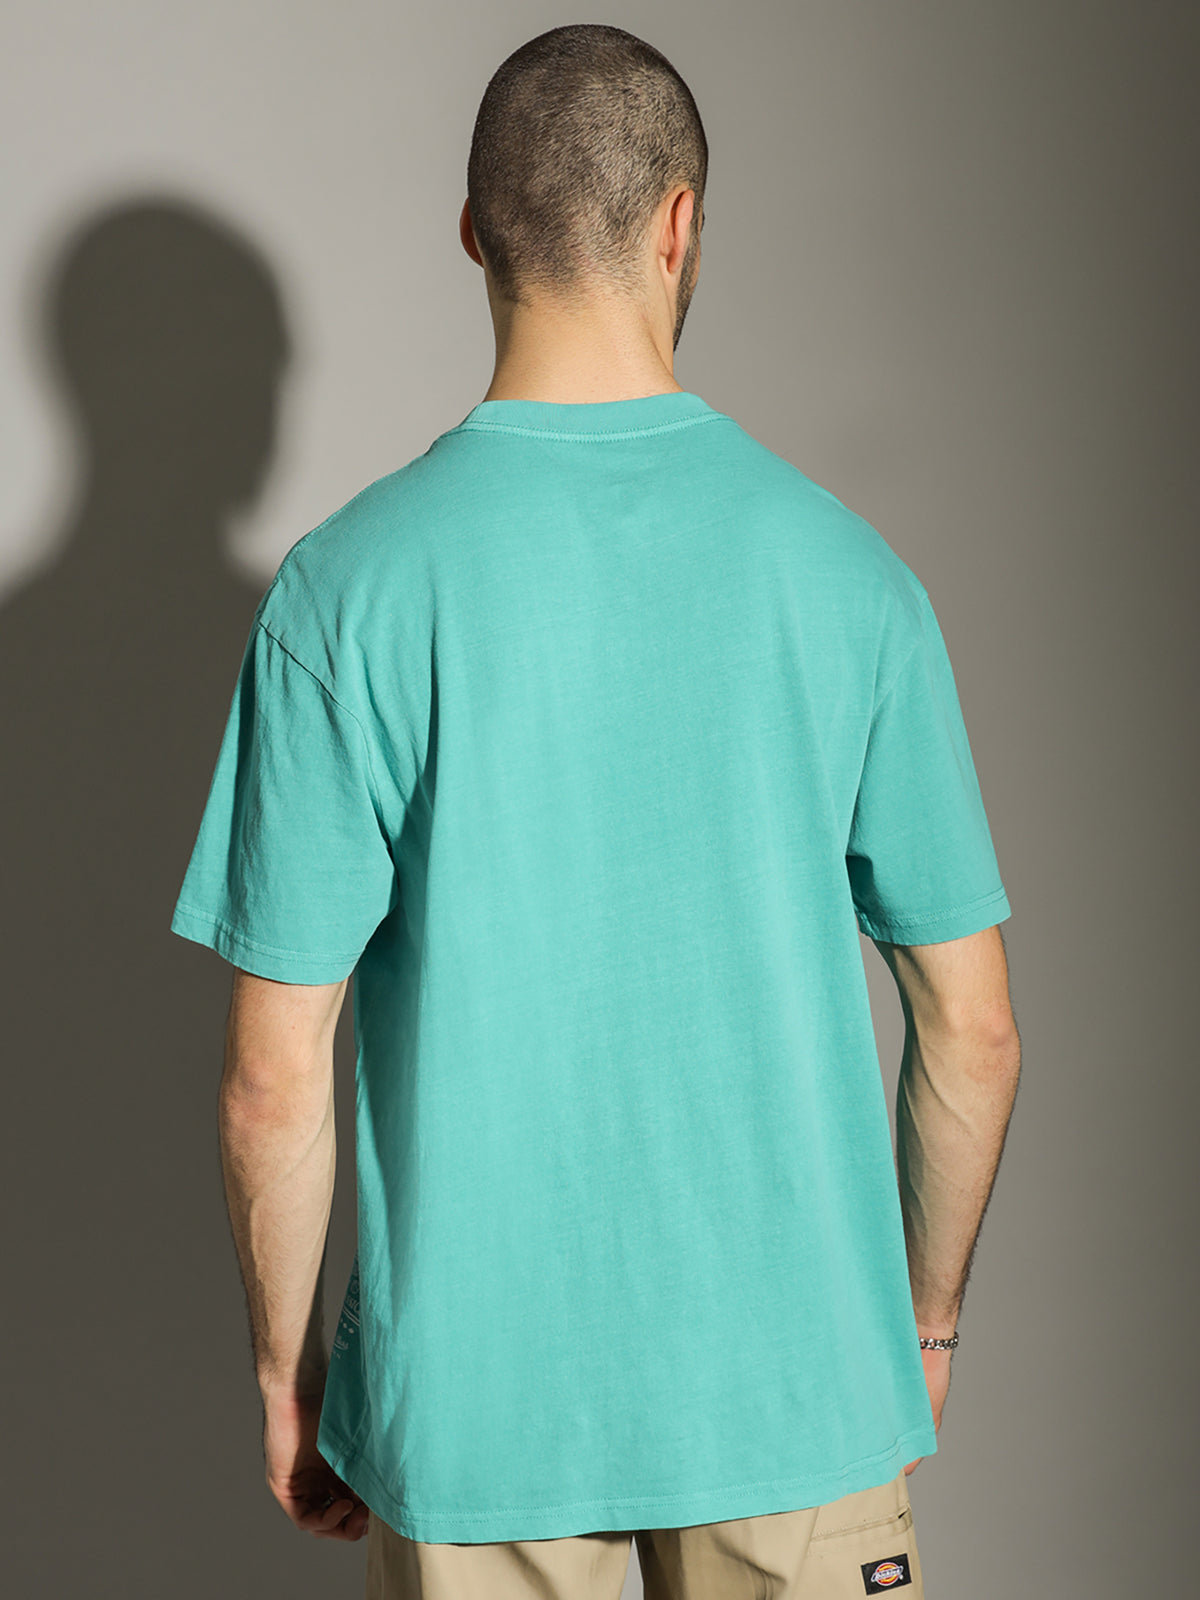 Charlotte Hornets T-Shirt in Faded Teal